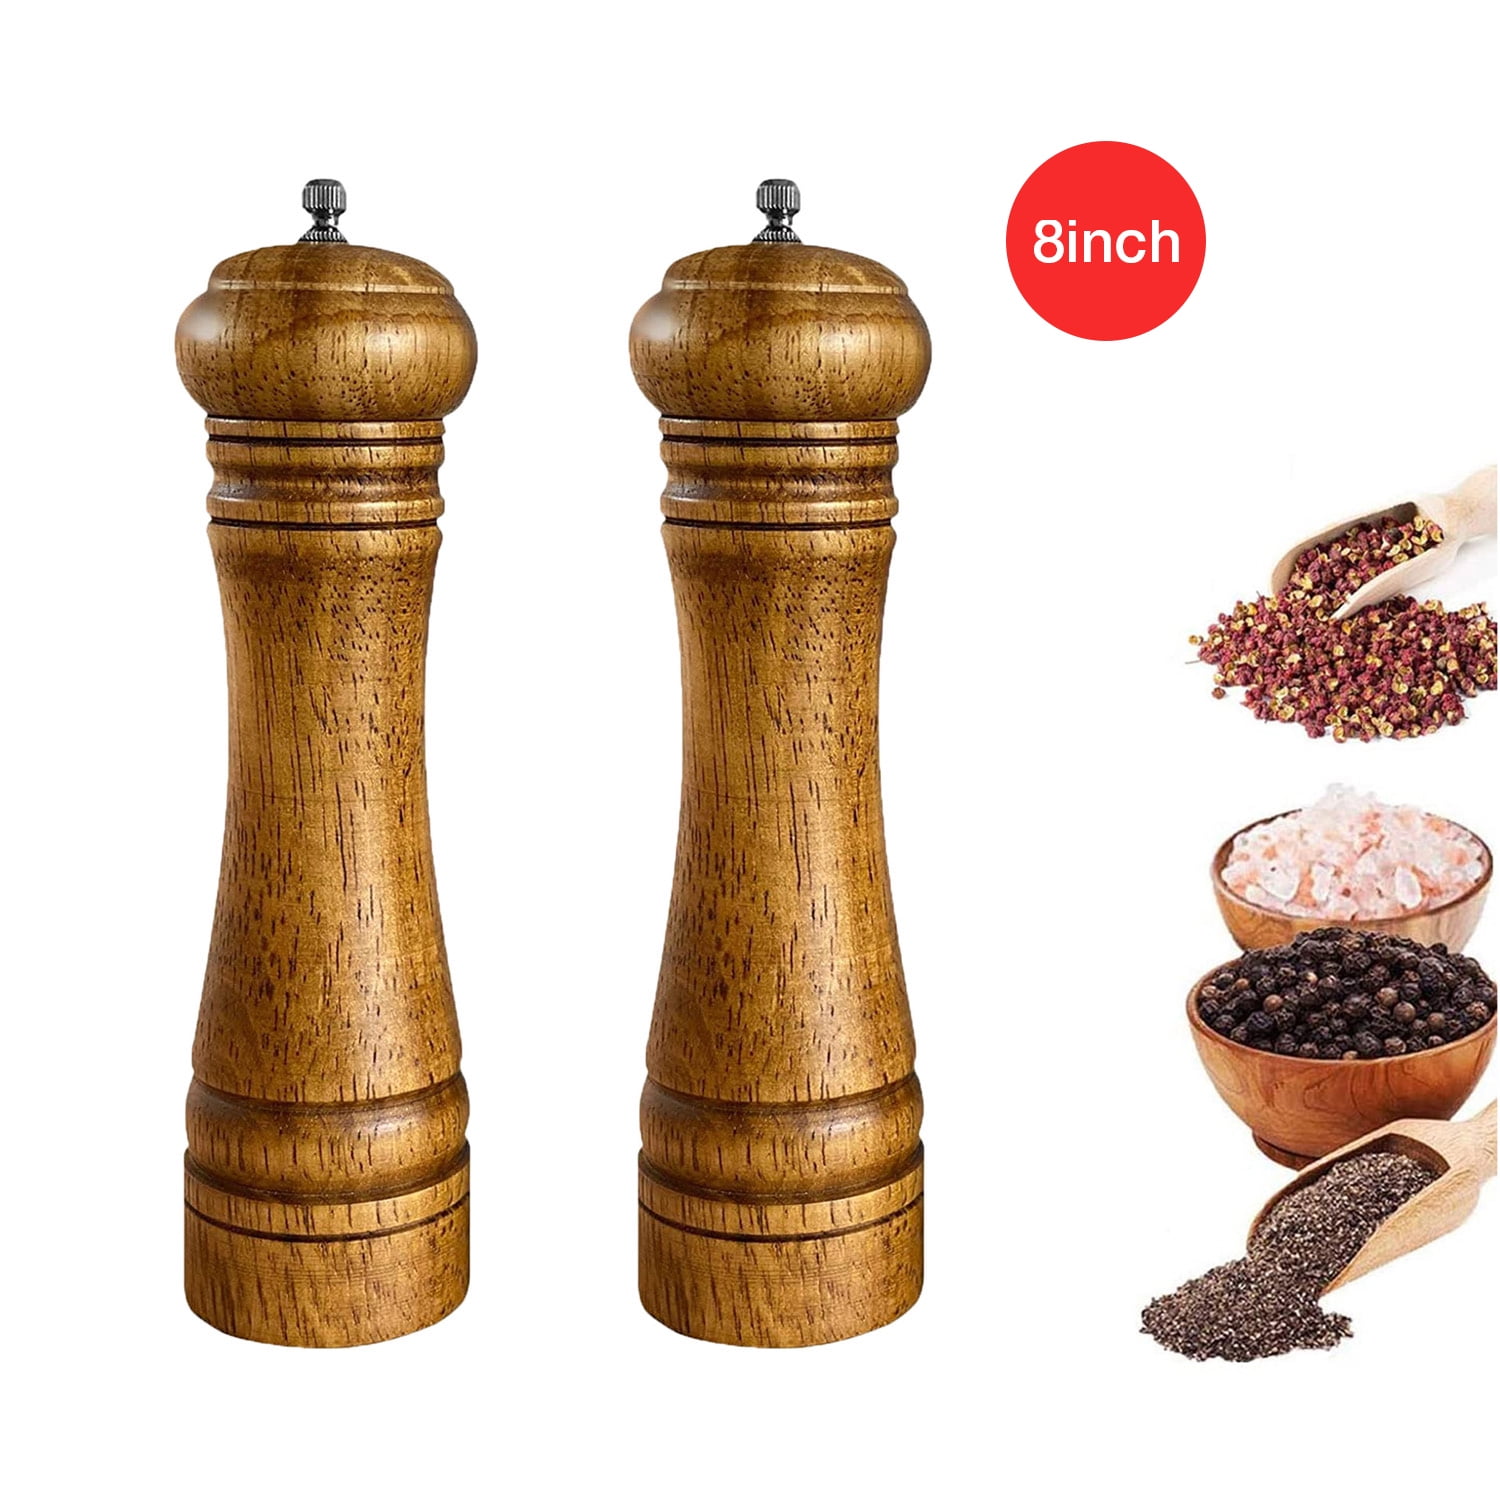 One Black Pepper Grinder, Manual Kitchen Herb & Spice Grinder For Home Use,  Glass Bottle Can Be Rotated To Adjust The Coarseness Of The Powder To Meet  Different Condiment Requirements